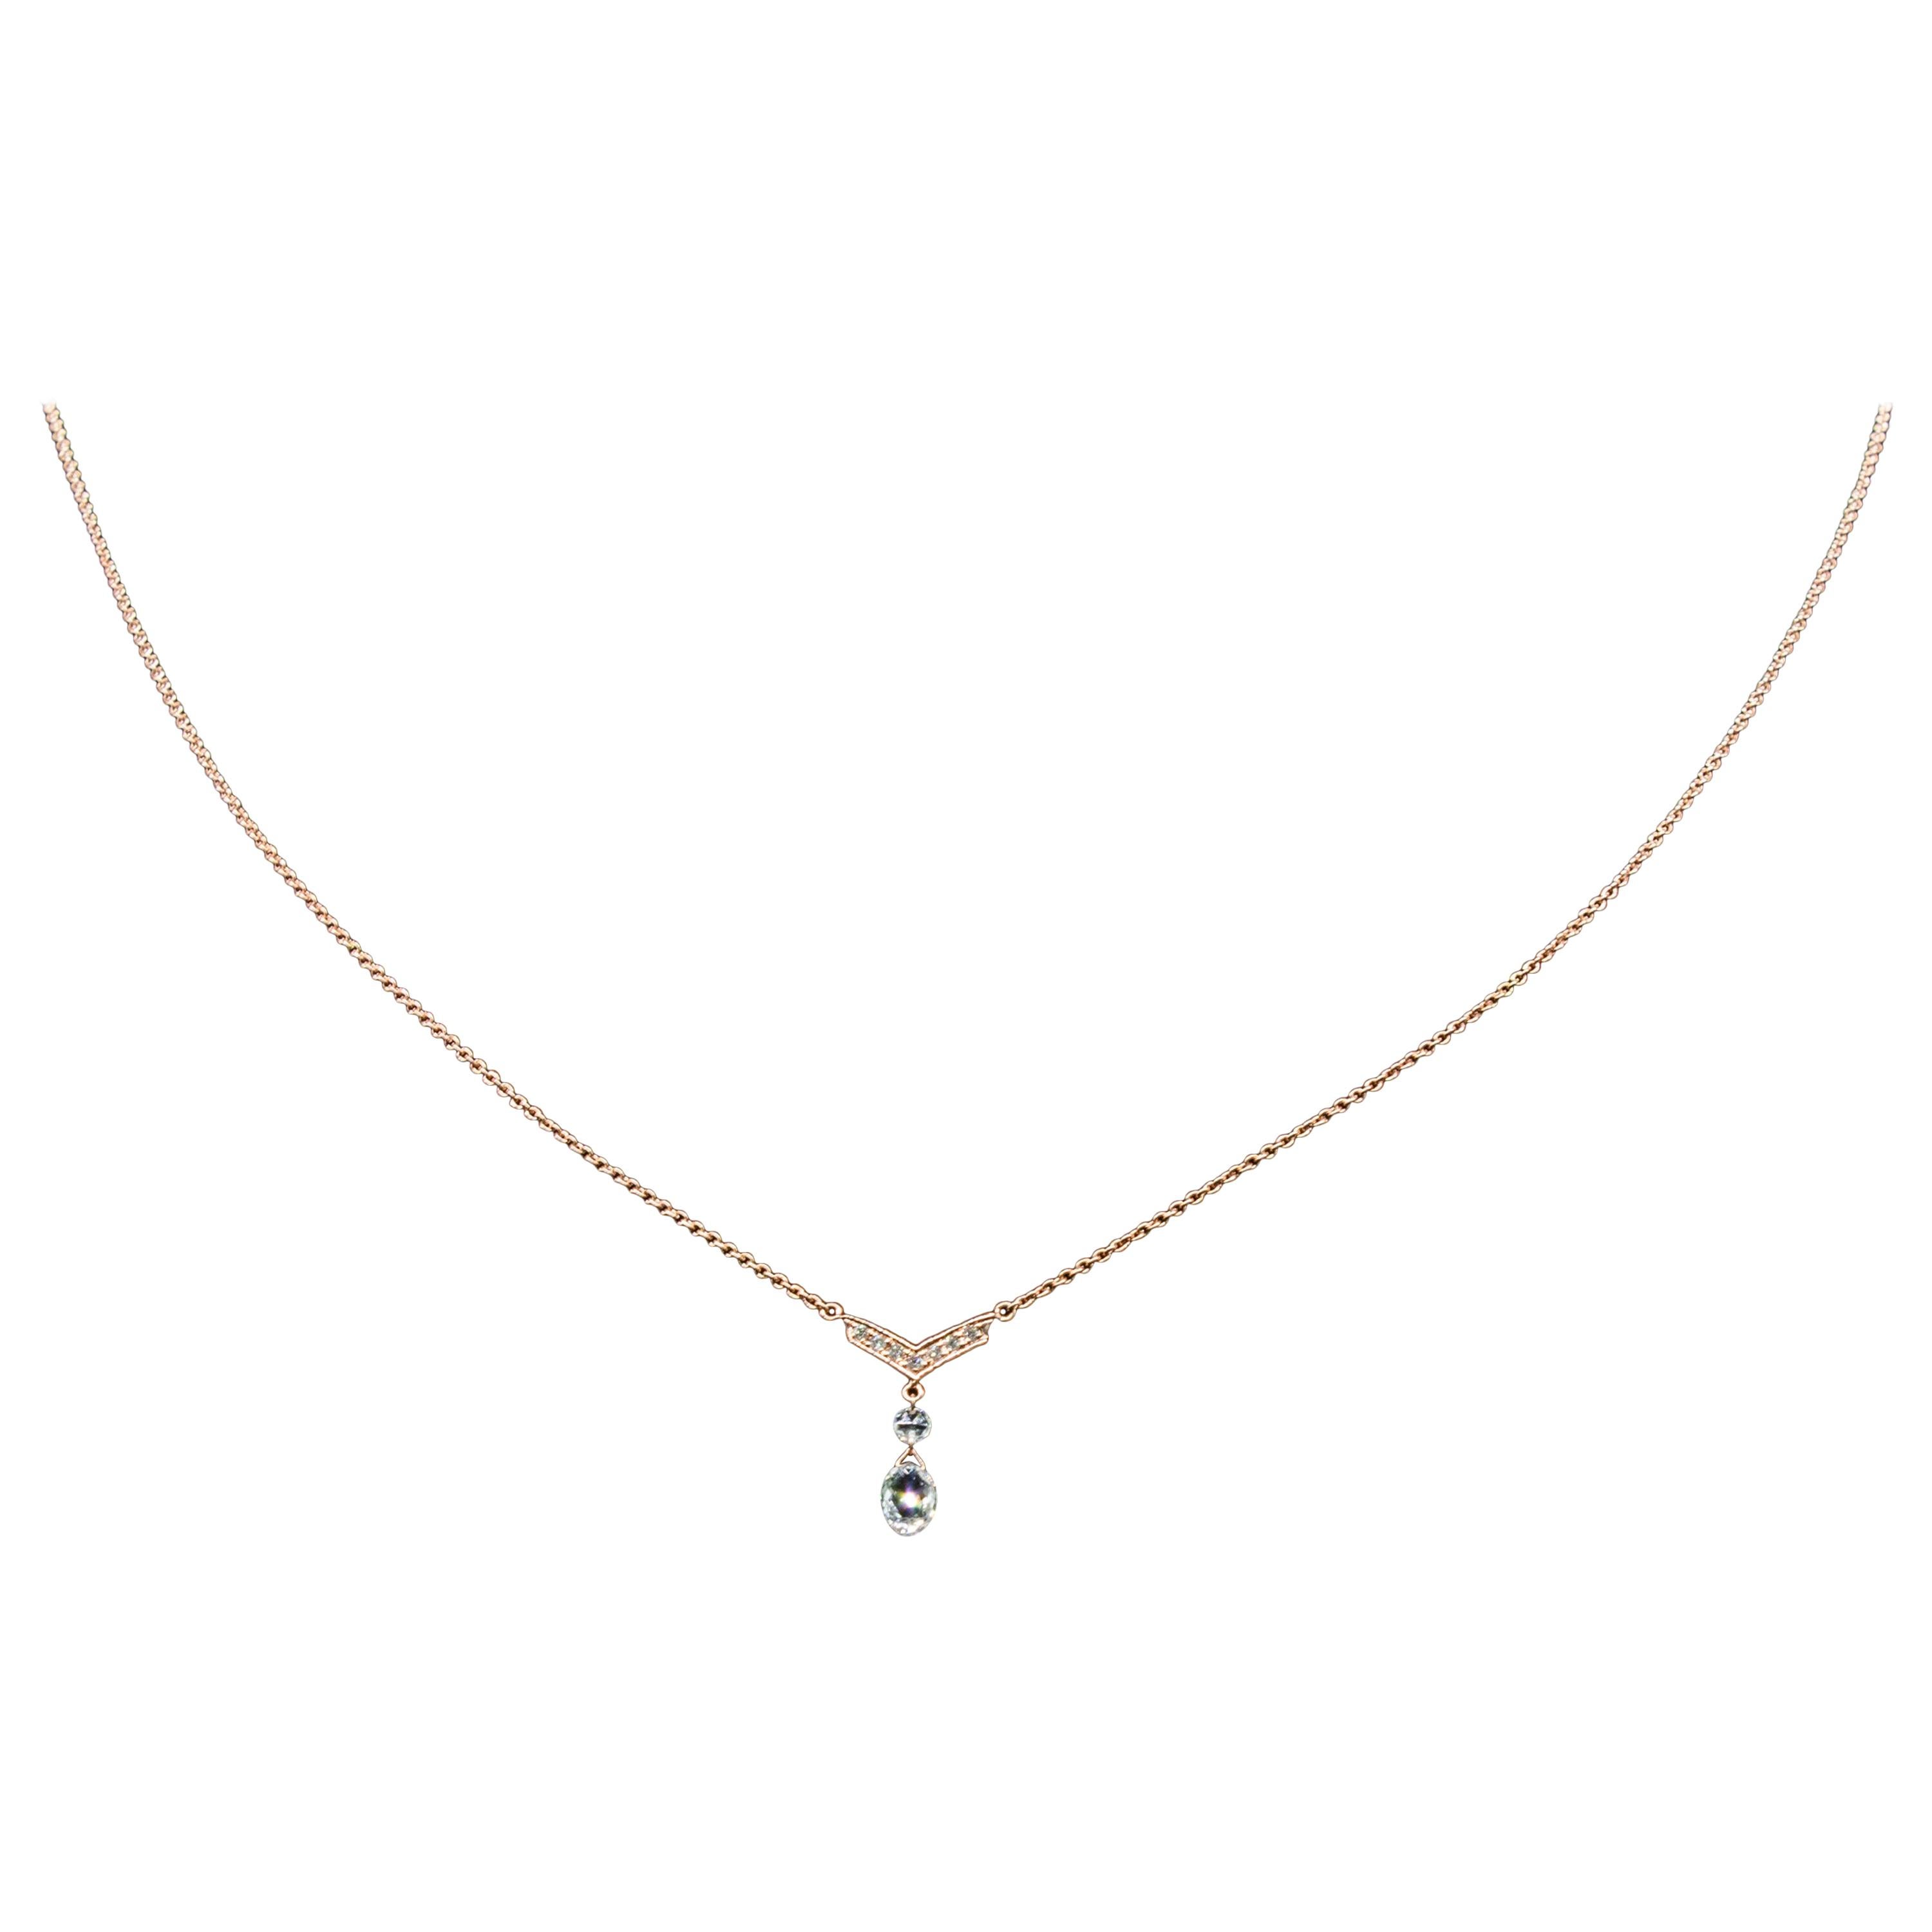 PANIM Diamond Briolette Drop 18K Rose Gold Pendent Necklace

This is a beautifully crafted 50pts Briolette Pendant Necklace which can be worn daily .

Details :

Total Diamond Carats : 0.57 cts
18K Gold : 1.808 gms

High quality and ethically